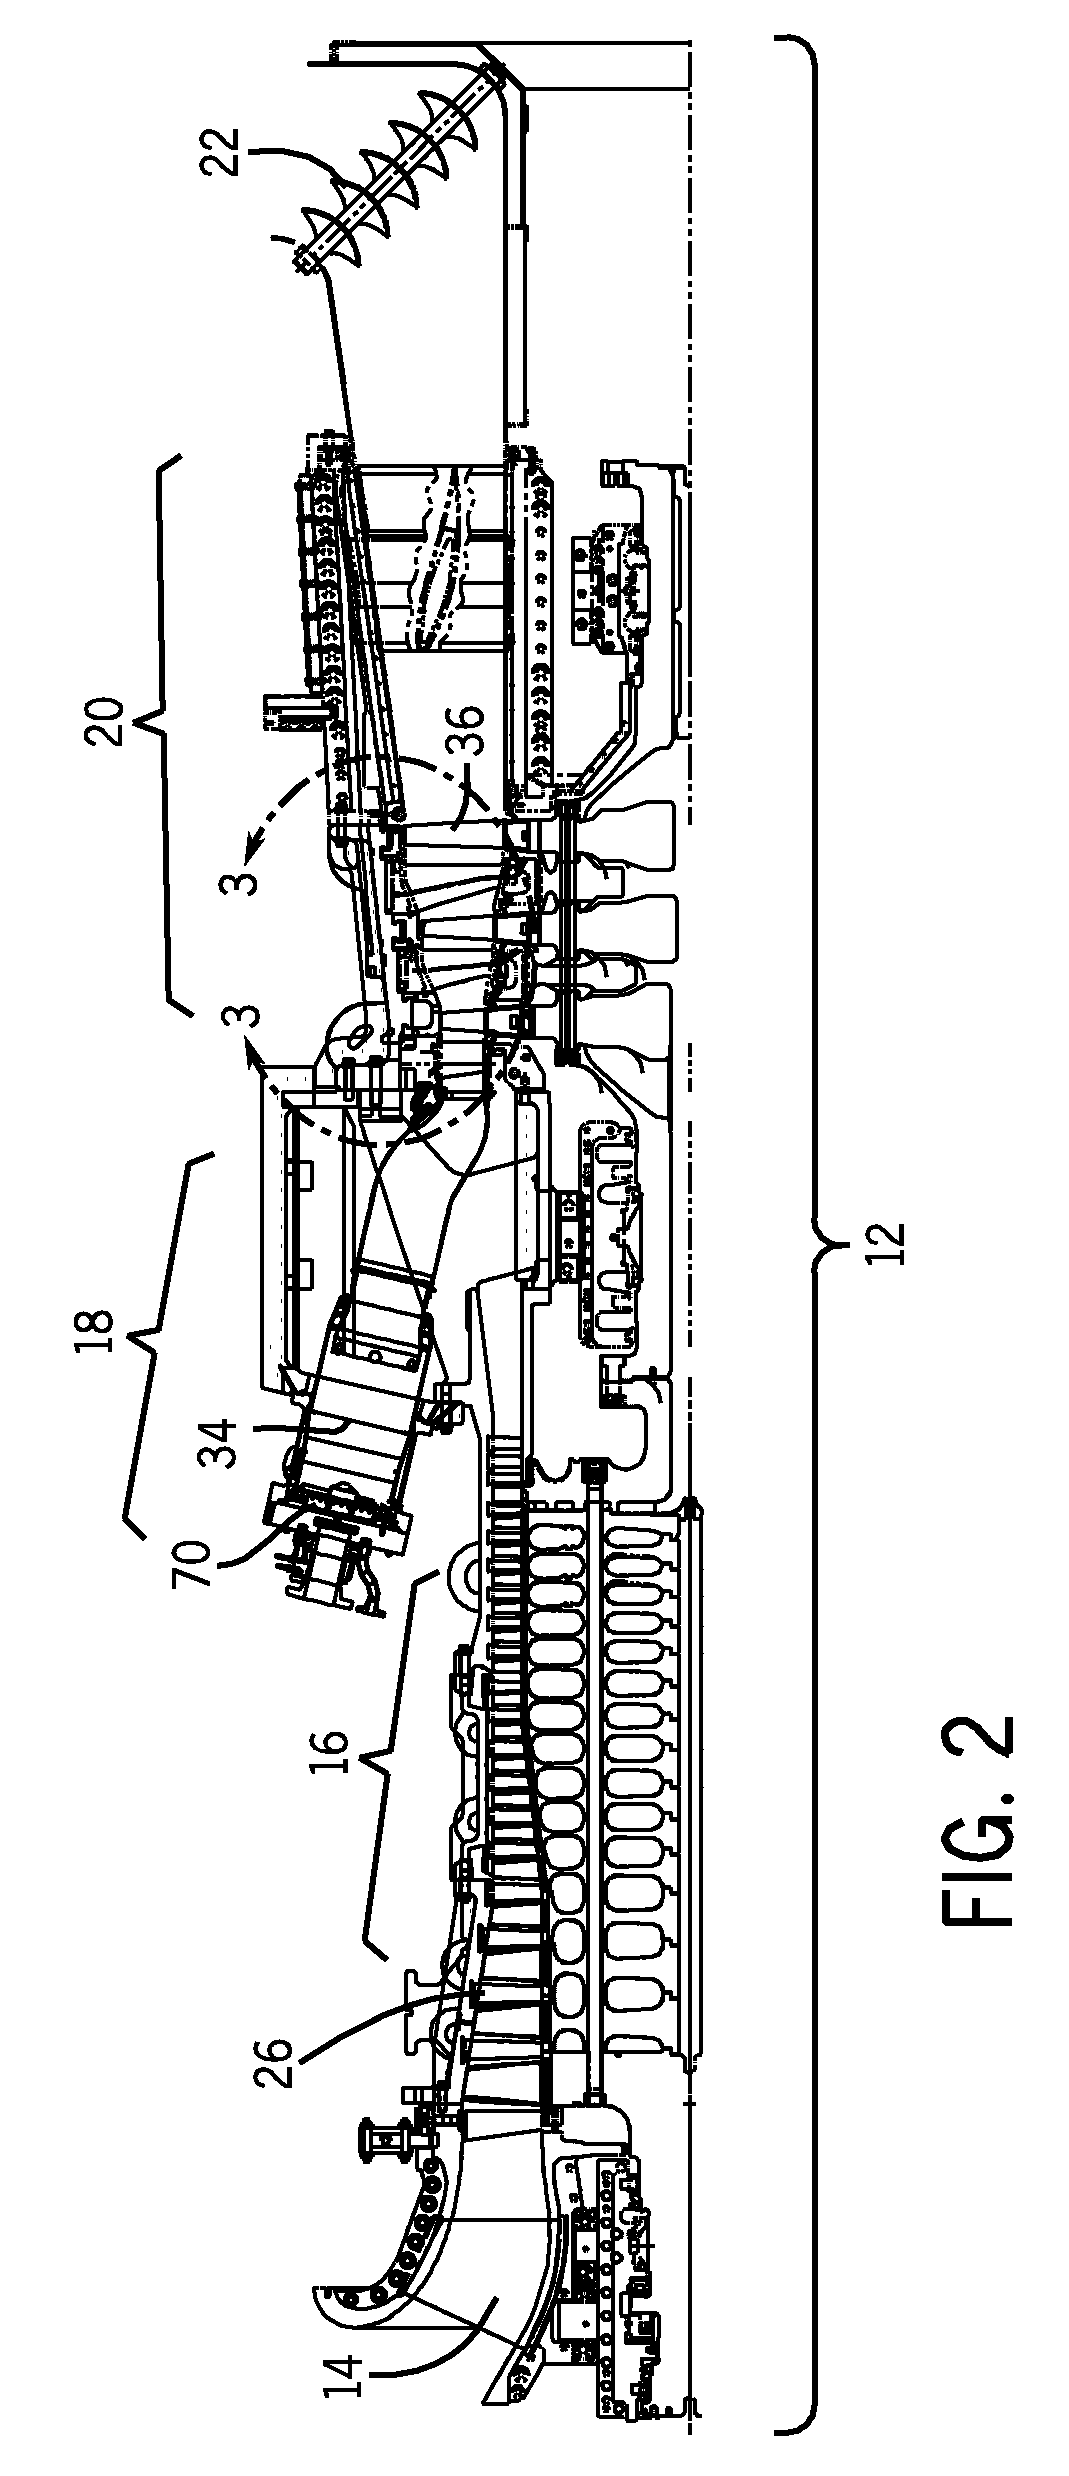 System and method for clearance control in a rotary machine